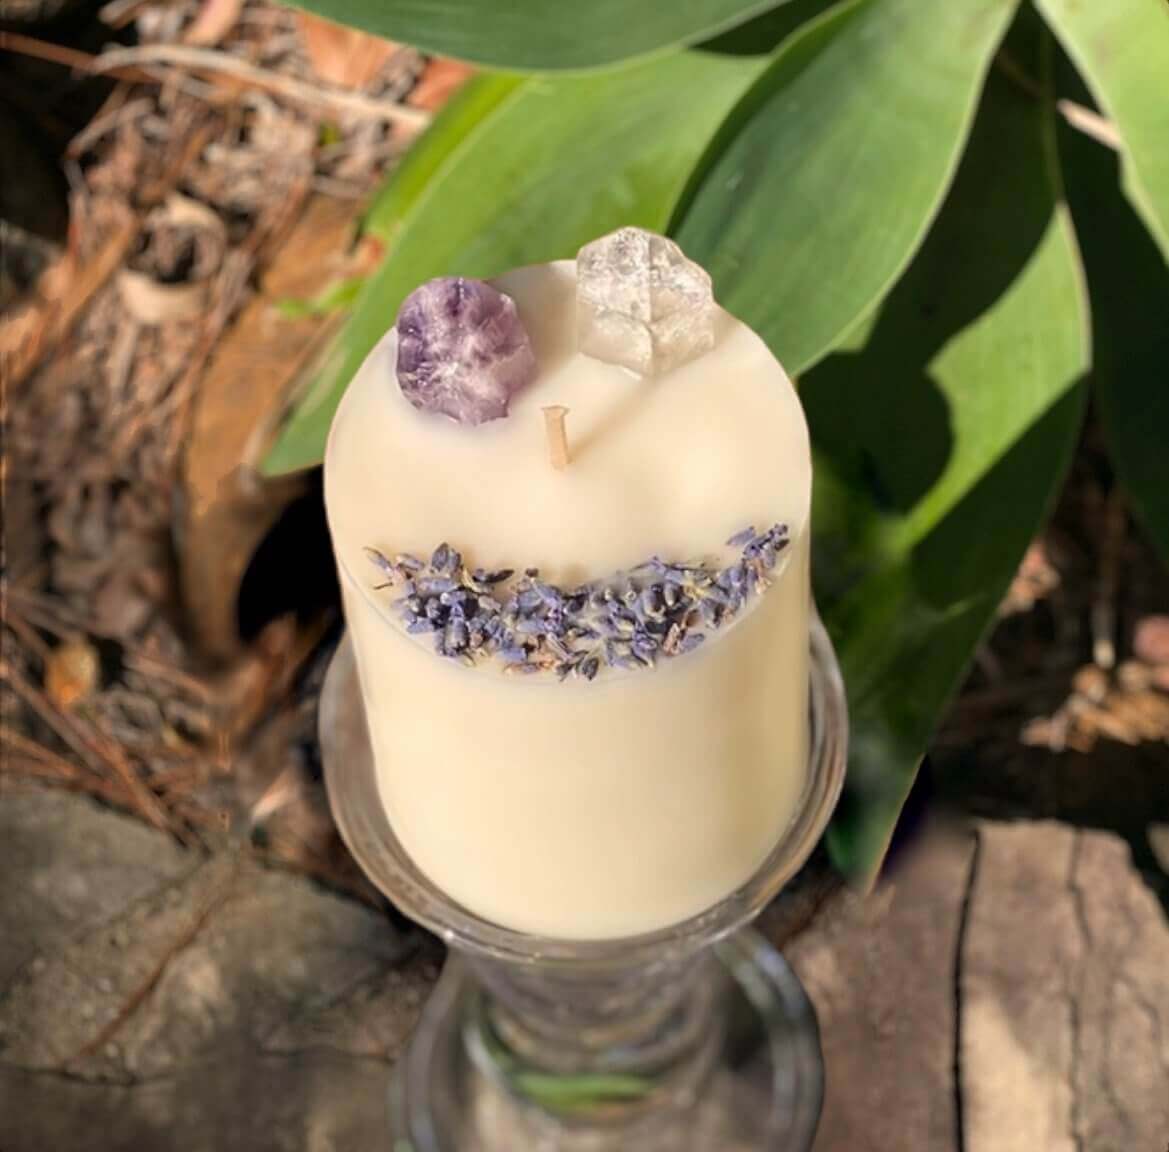 Amethyst Crystal Candle - Serenity Aroma Experience tranquility with our Amethyst Infused Crystal Pillar Candle, ideal for creating a serene and harmonious atmosphere at home.